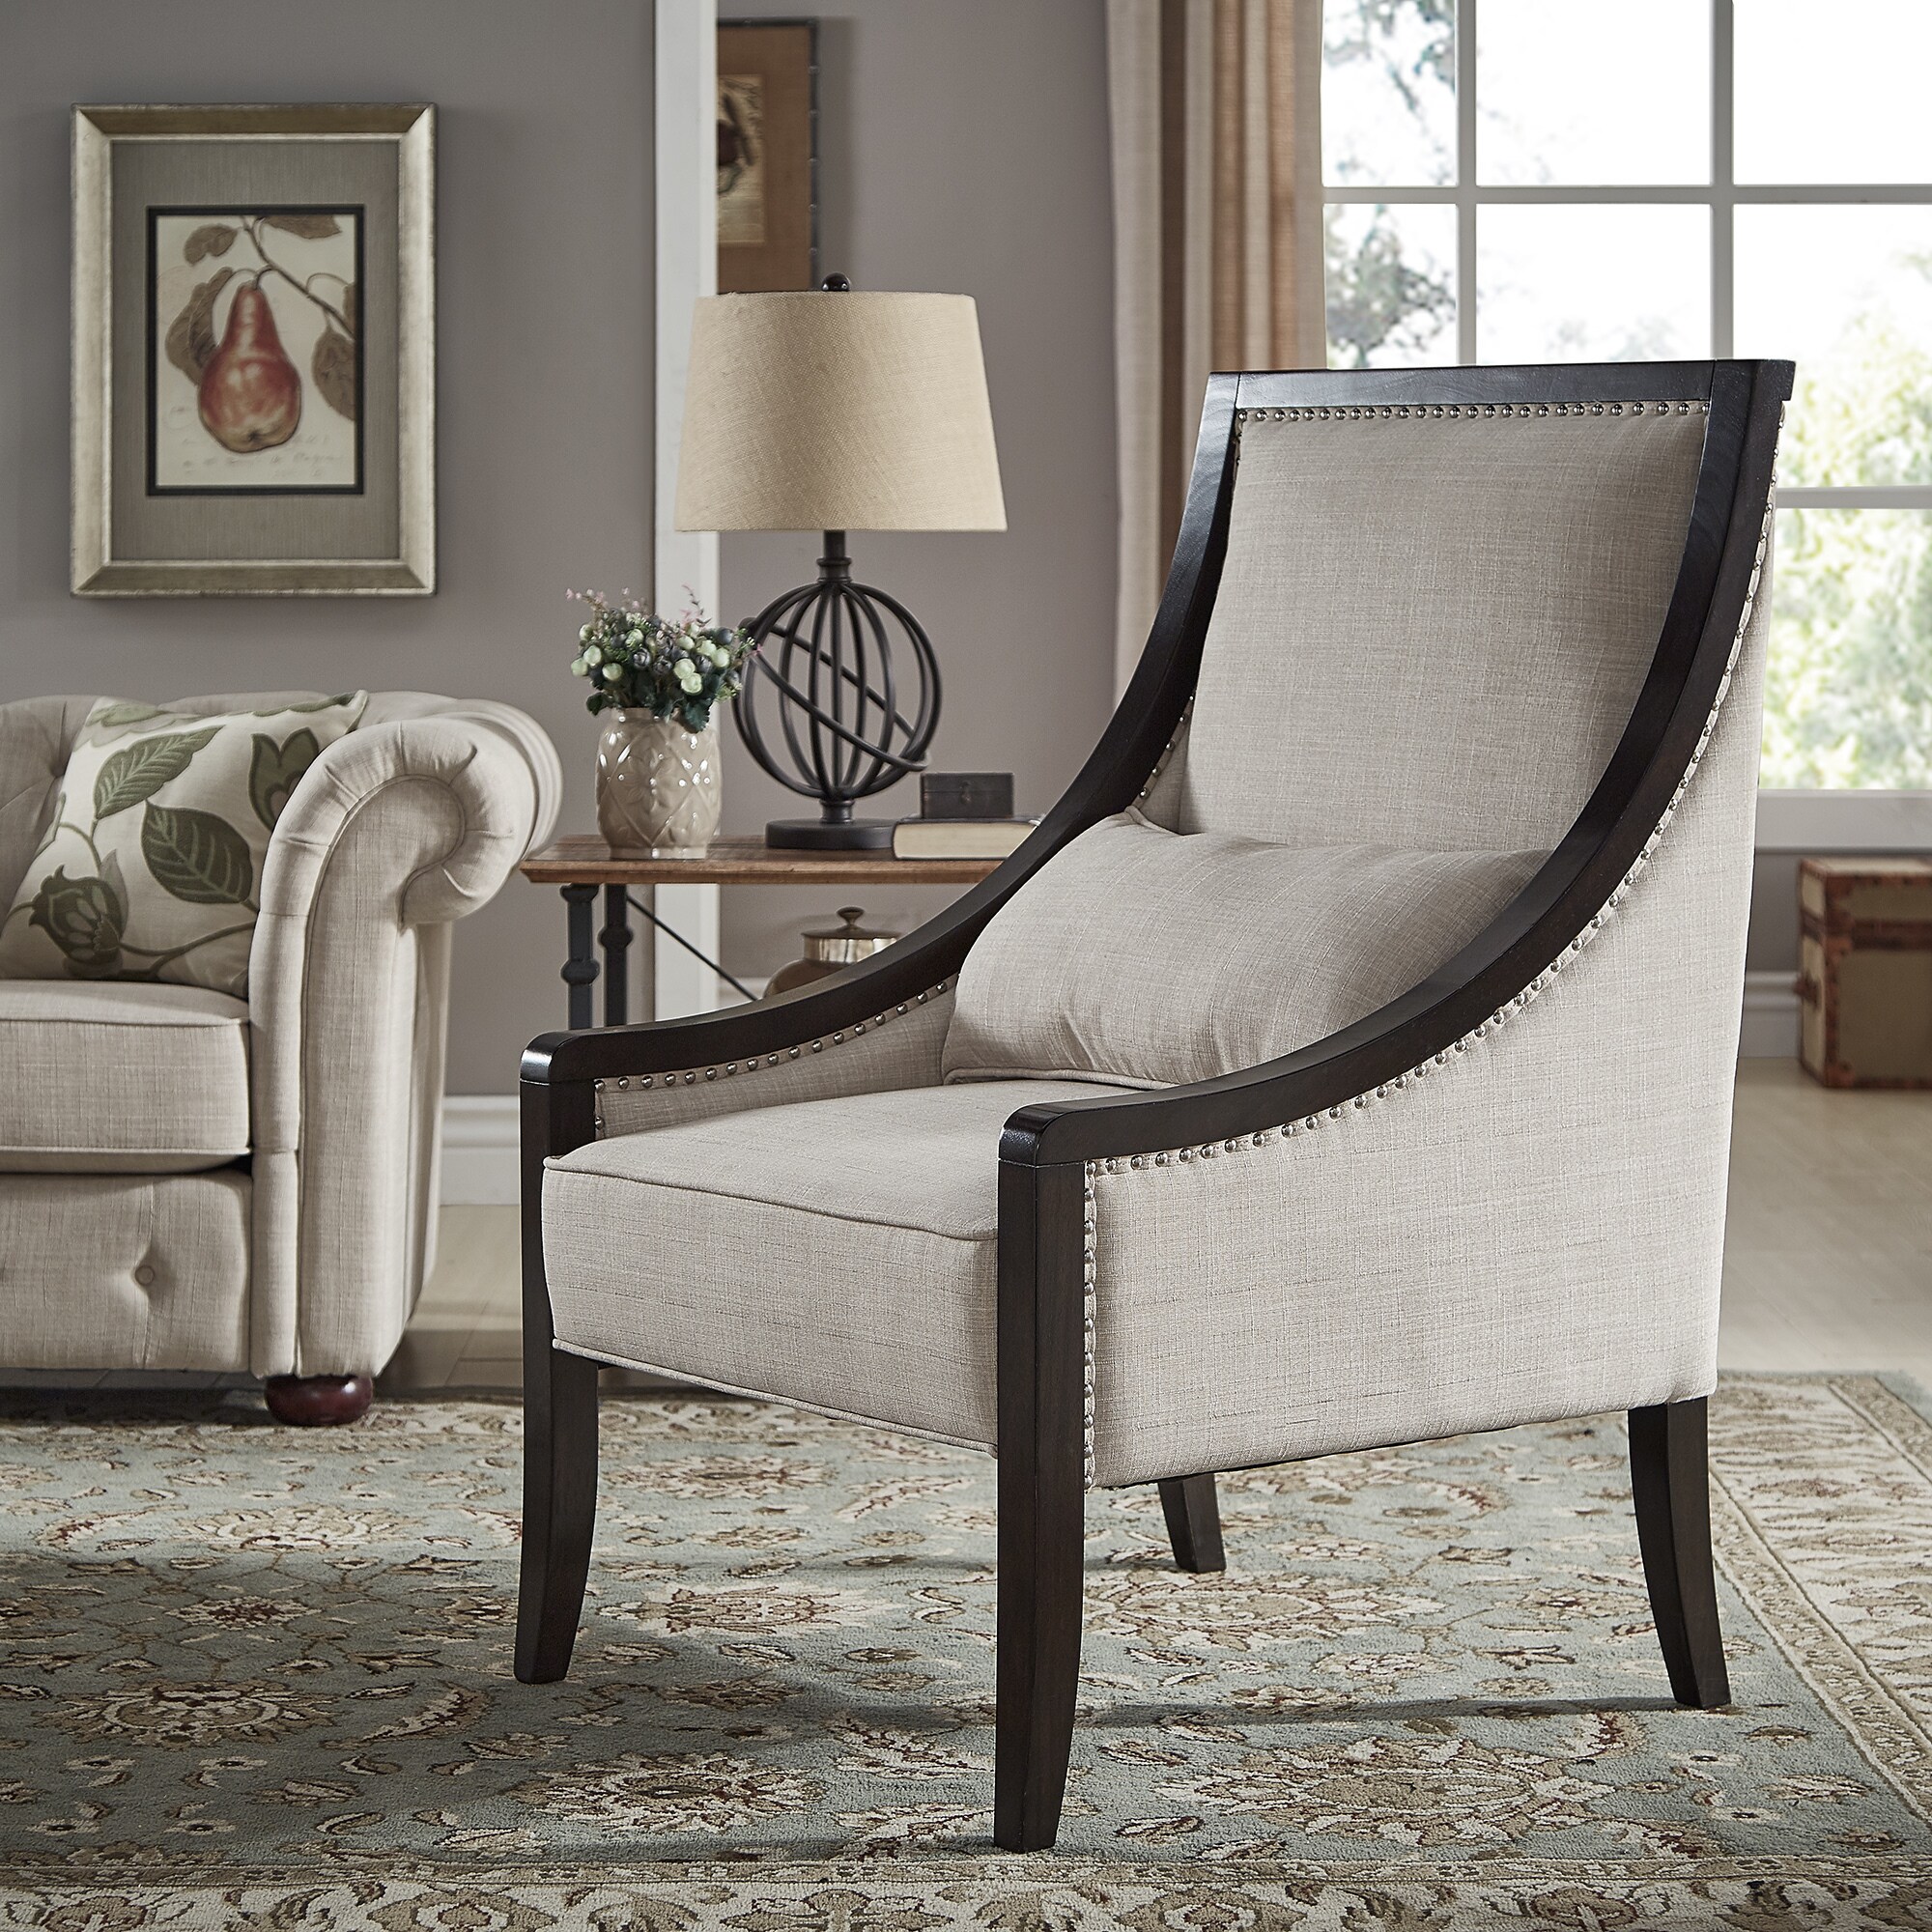 Francis Espresso Wood Framed Beige Linen Sloped Arm Accent Chair By INSPIRE Q Classic C5f31642 C0d4 4569 Affd A5052b5388c7 